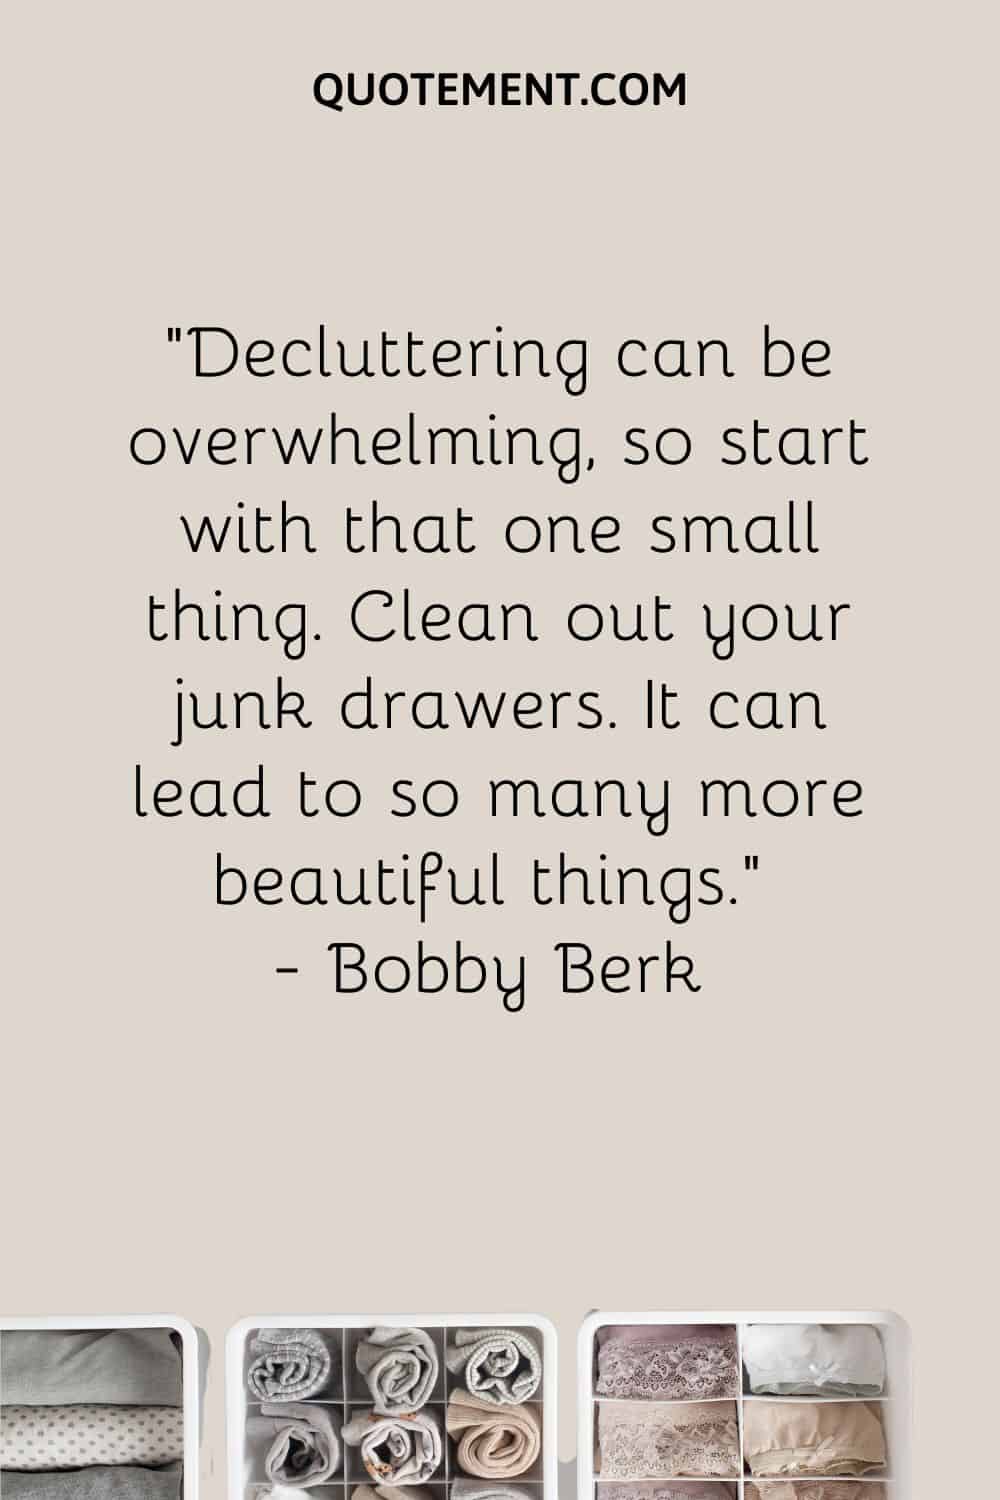 Decluttering can be overwhelming, so start with that one small thing